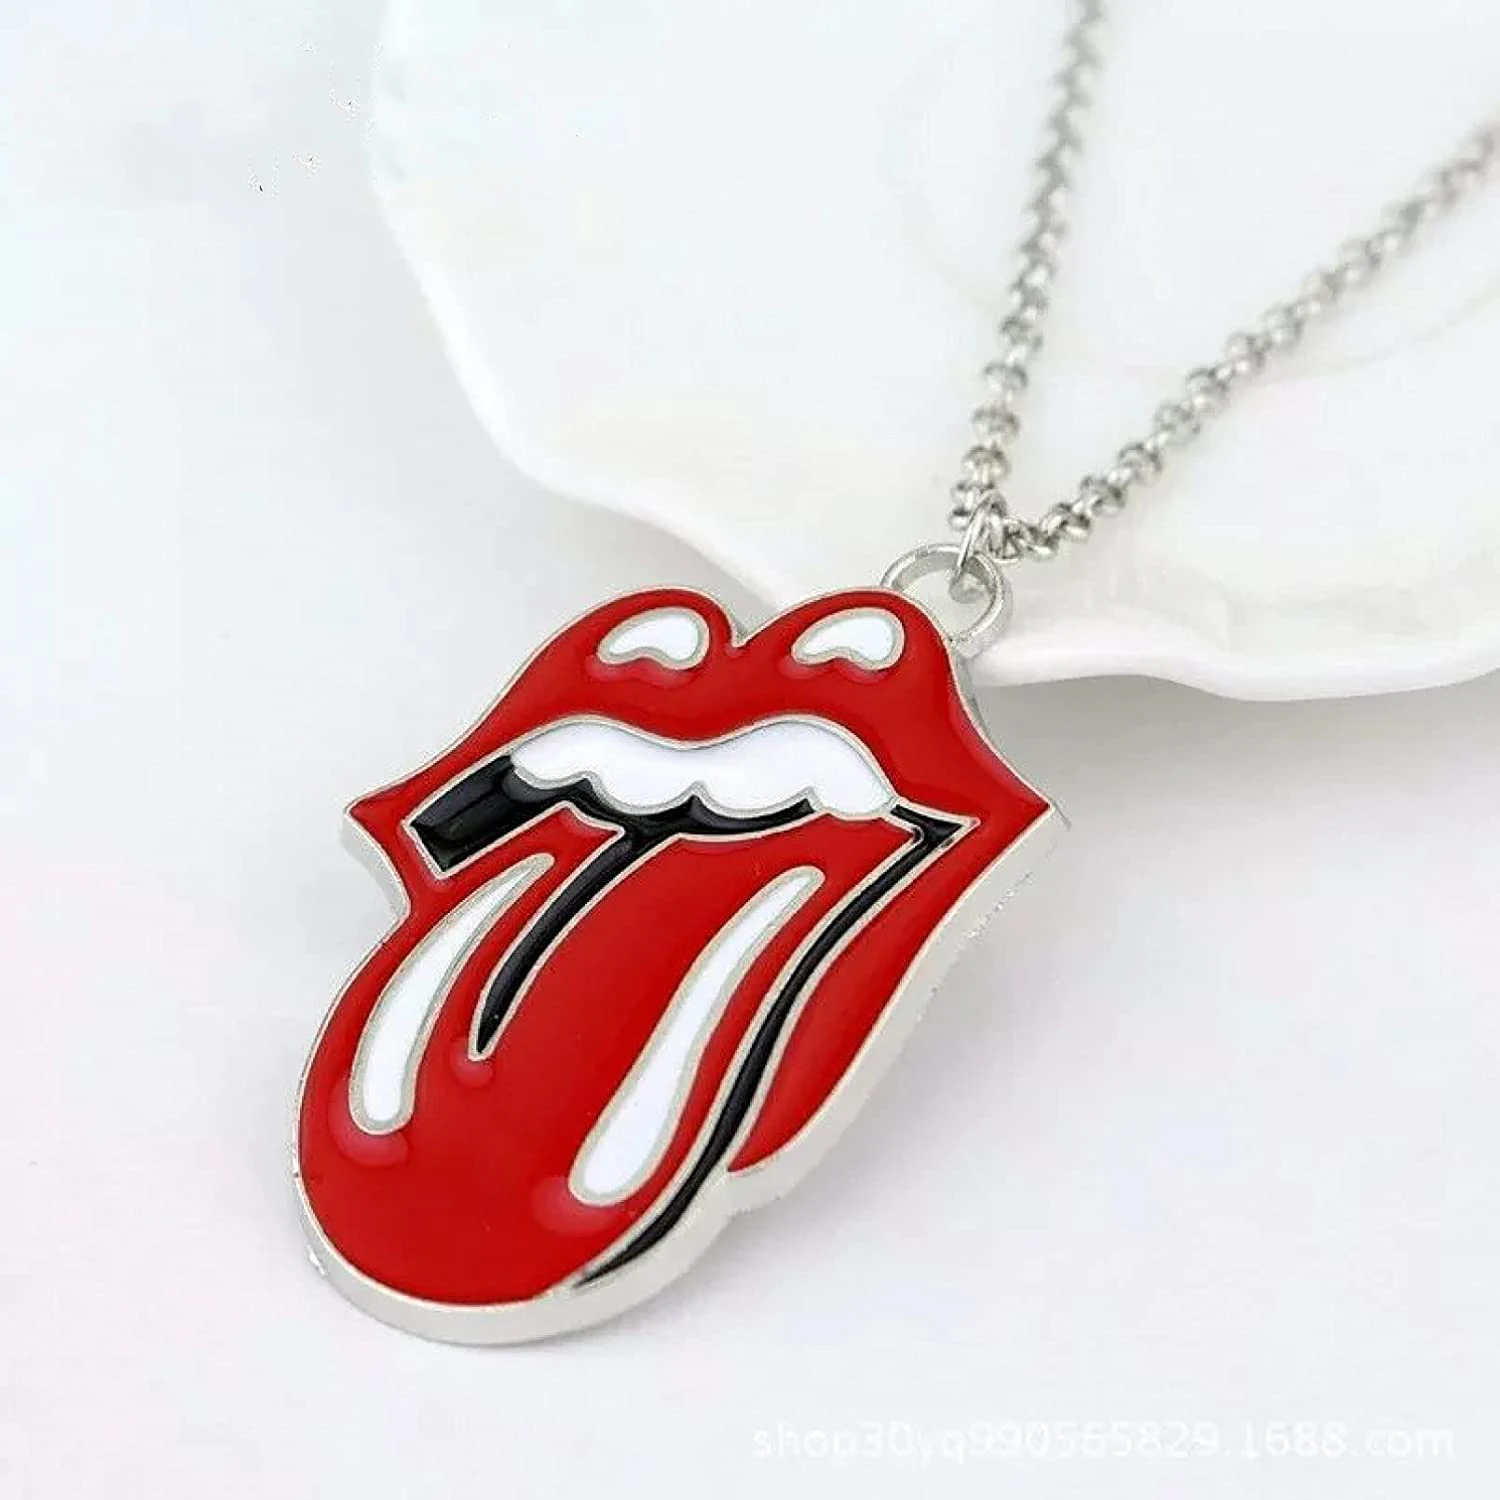 

Rolling Stones Necklace Lip and Tongue Pendant Red Rock Music Band Hip Hop Necklace Gift for Women Men